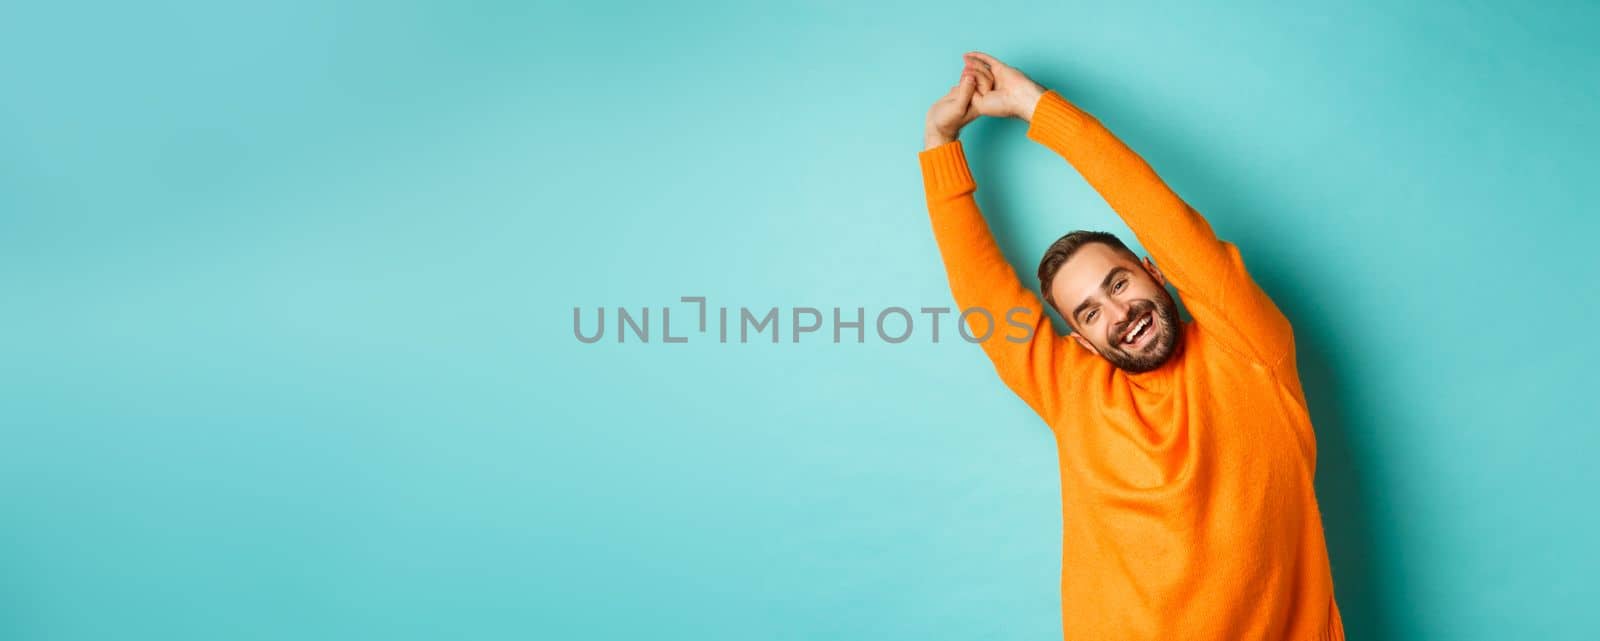 Image of handsome young man stretching hands and smiling after good rest, standing in orange sweater over light blue background.